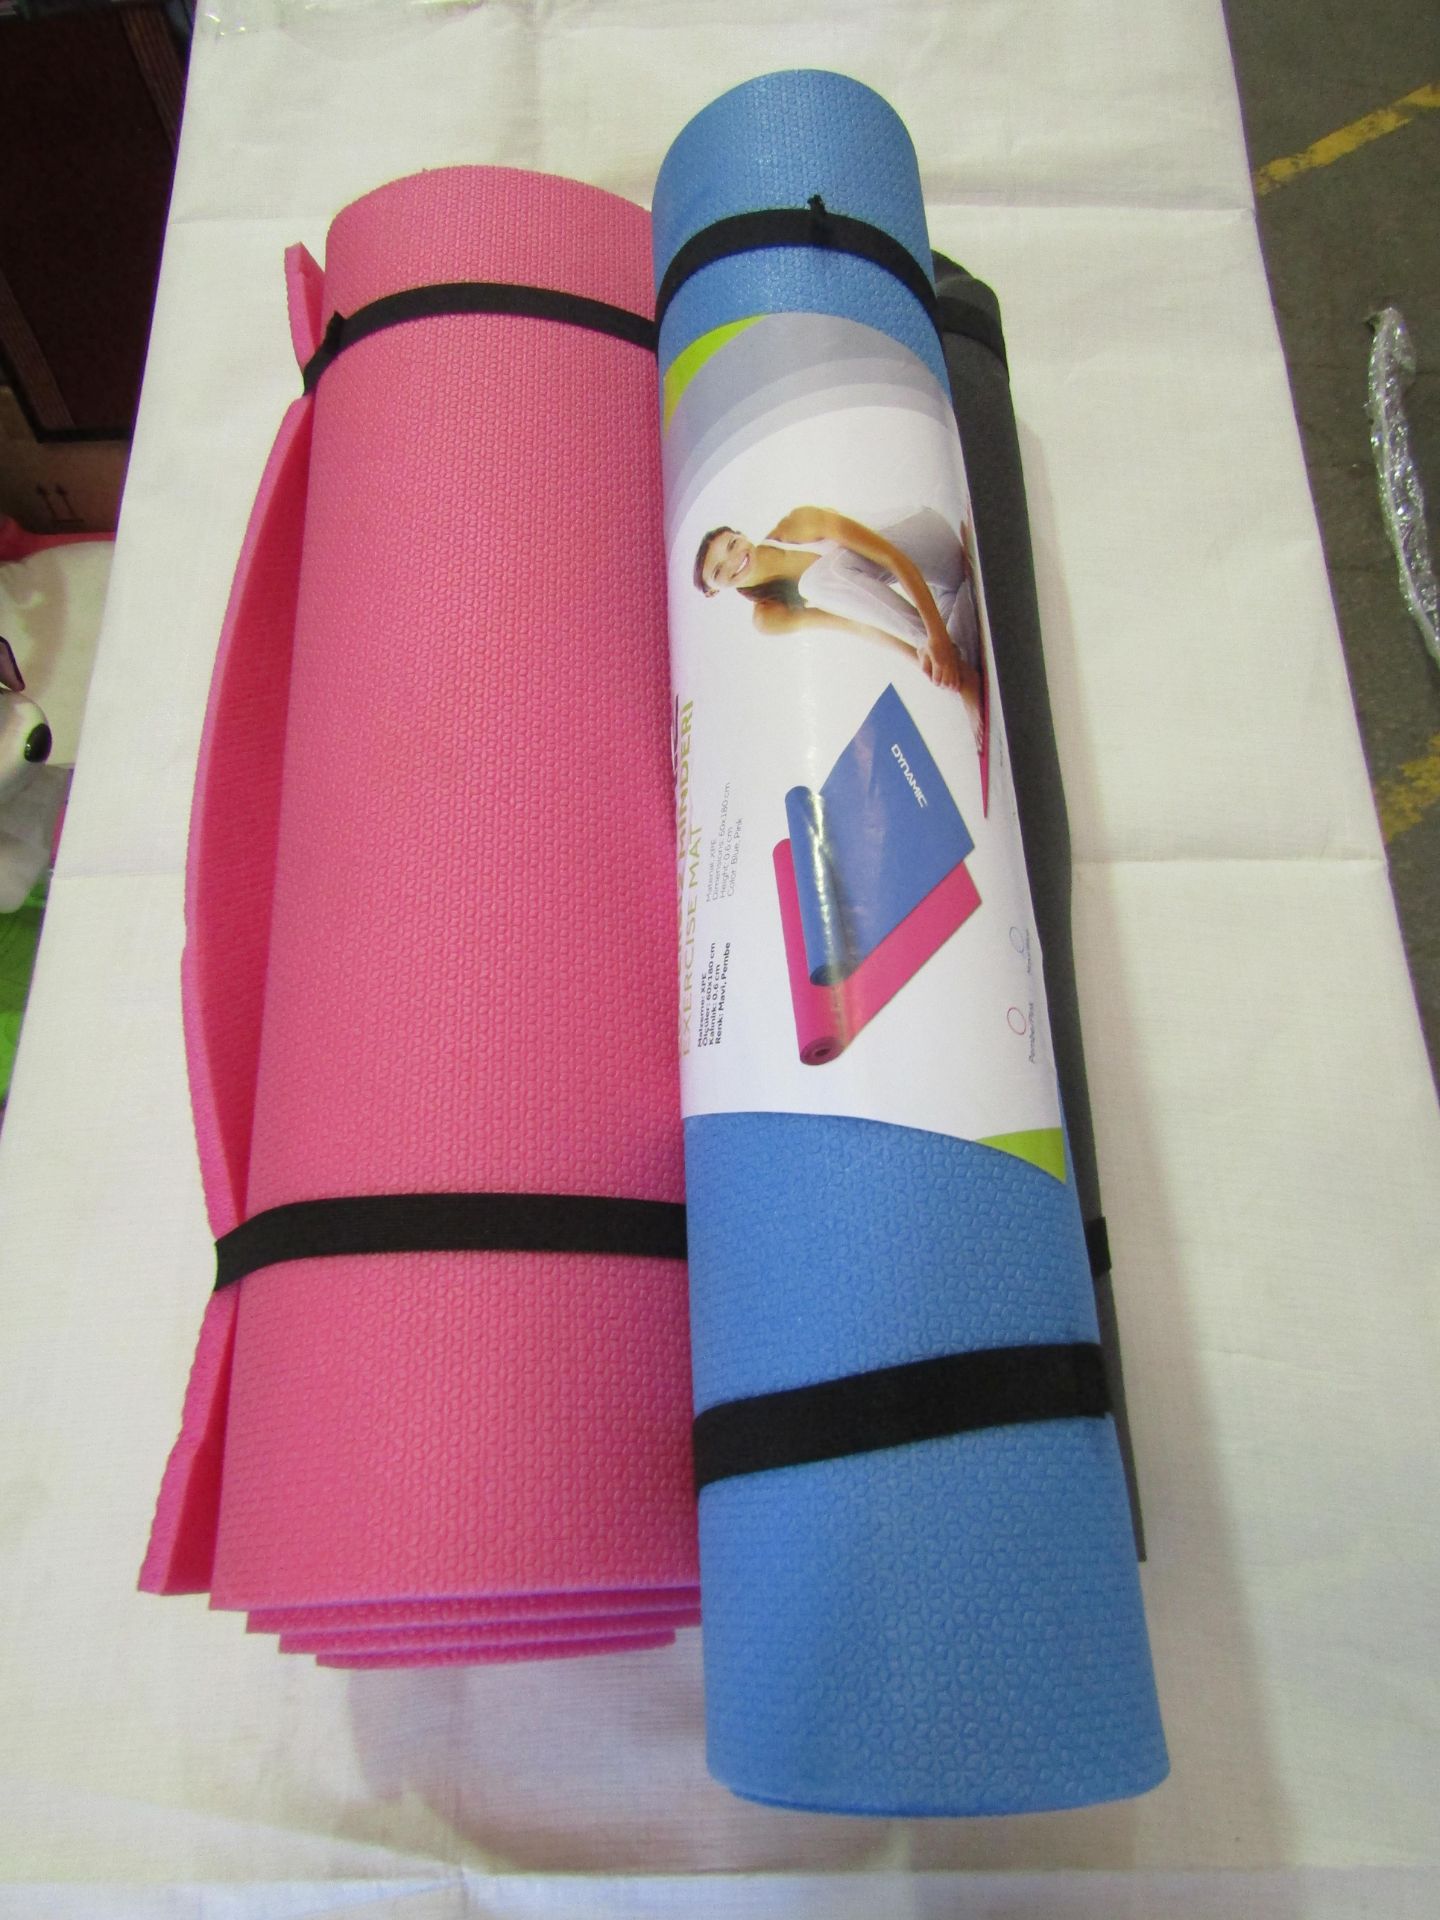 3x Various Exercise Mat's - All Unchecked & Rolled Up.